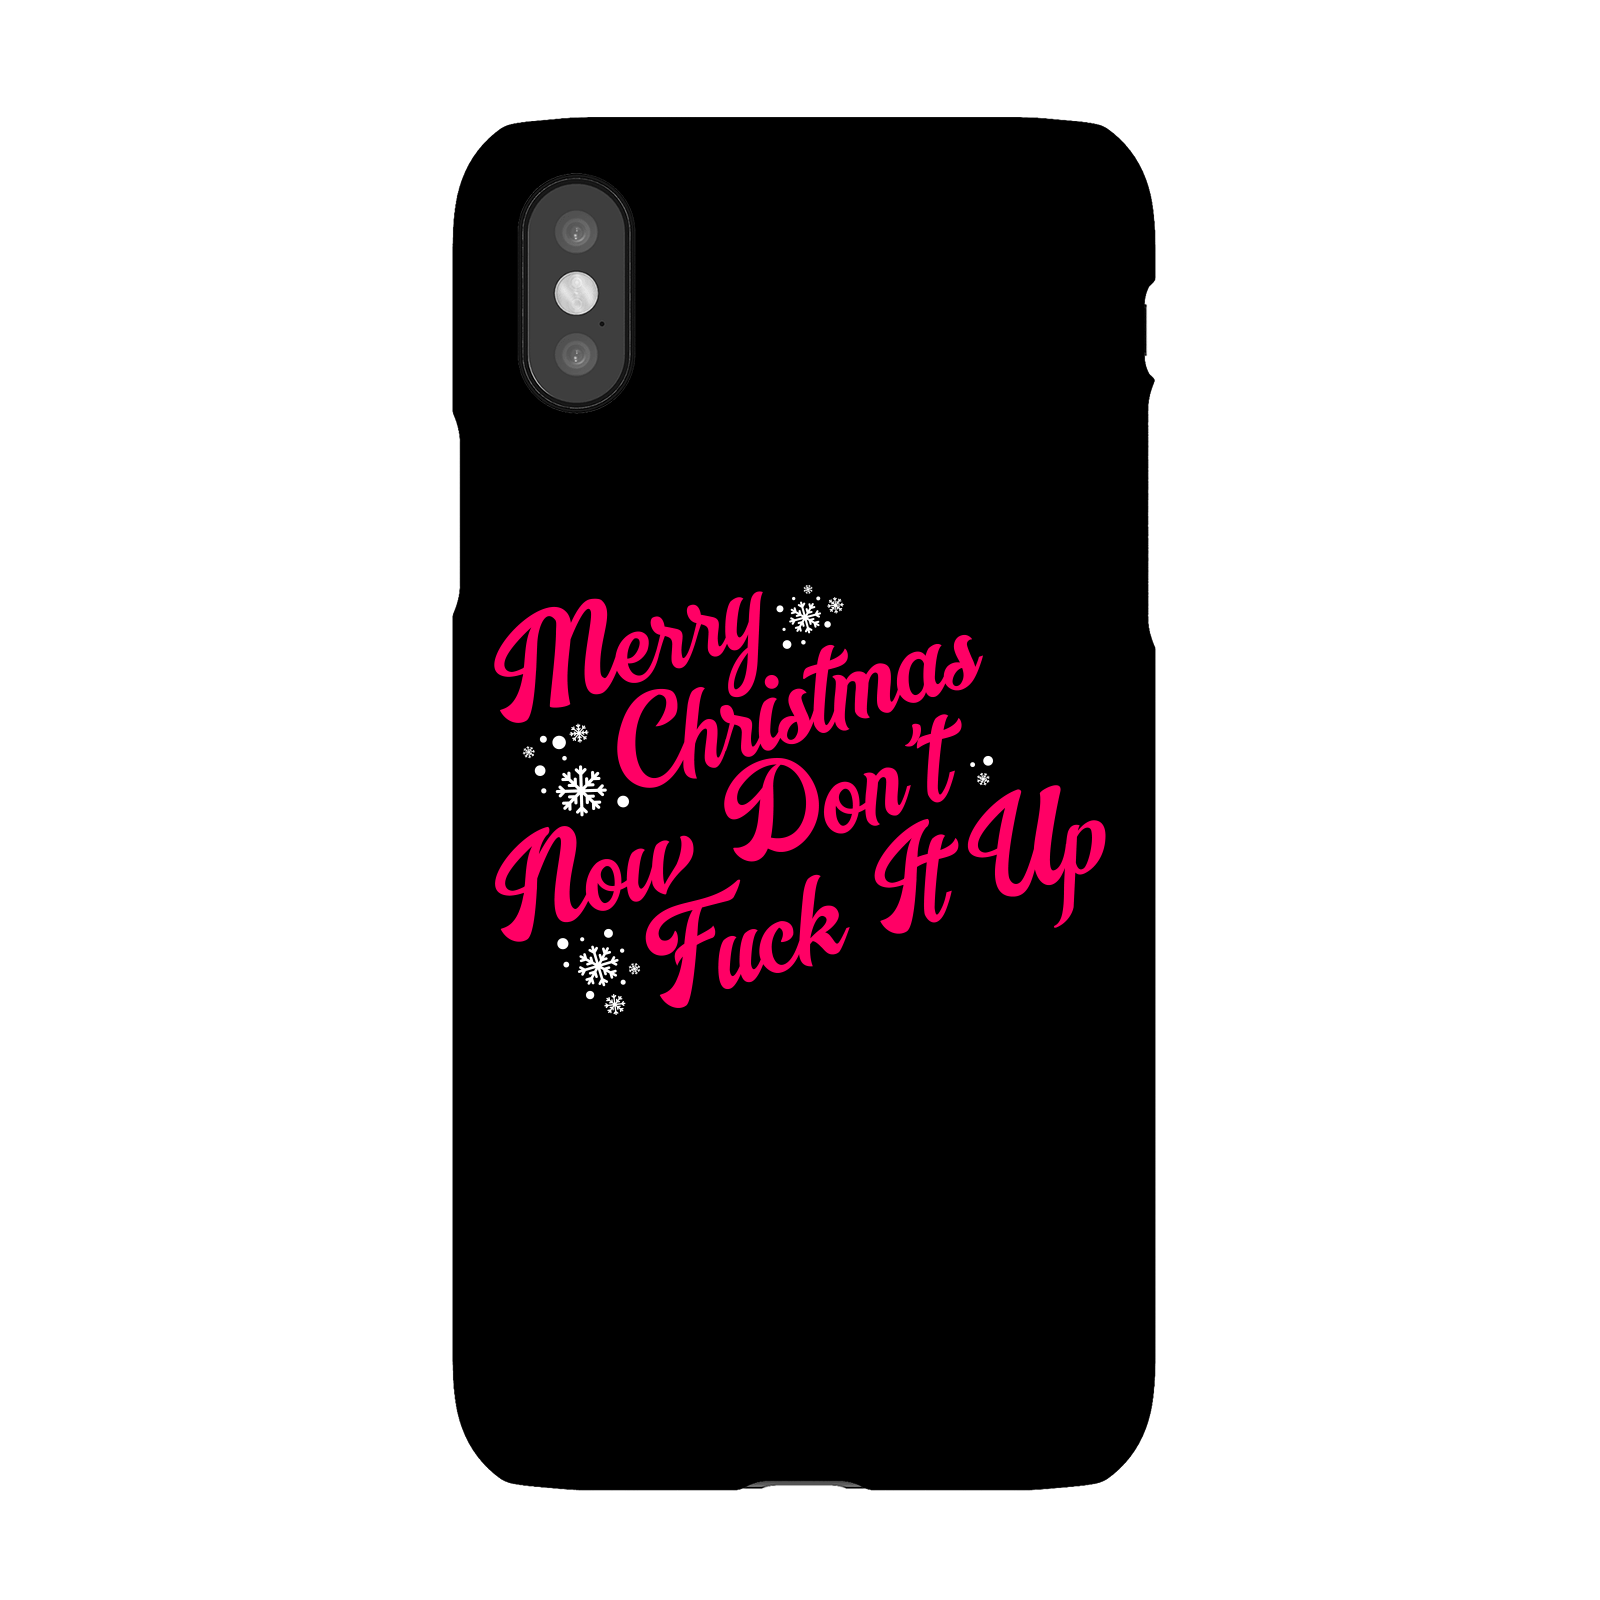 Don't Fuck Up Christmas Phone Case for iPhone and Android - iPhone 5/5s - Snap Case - Matte